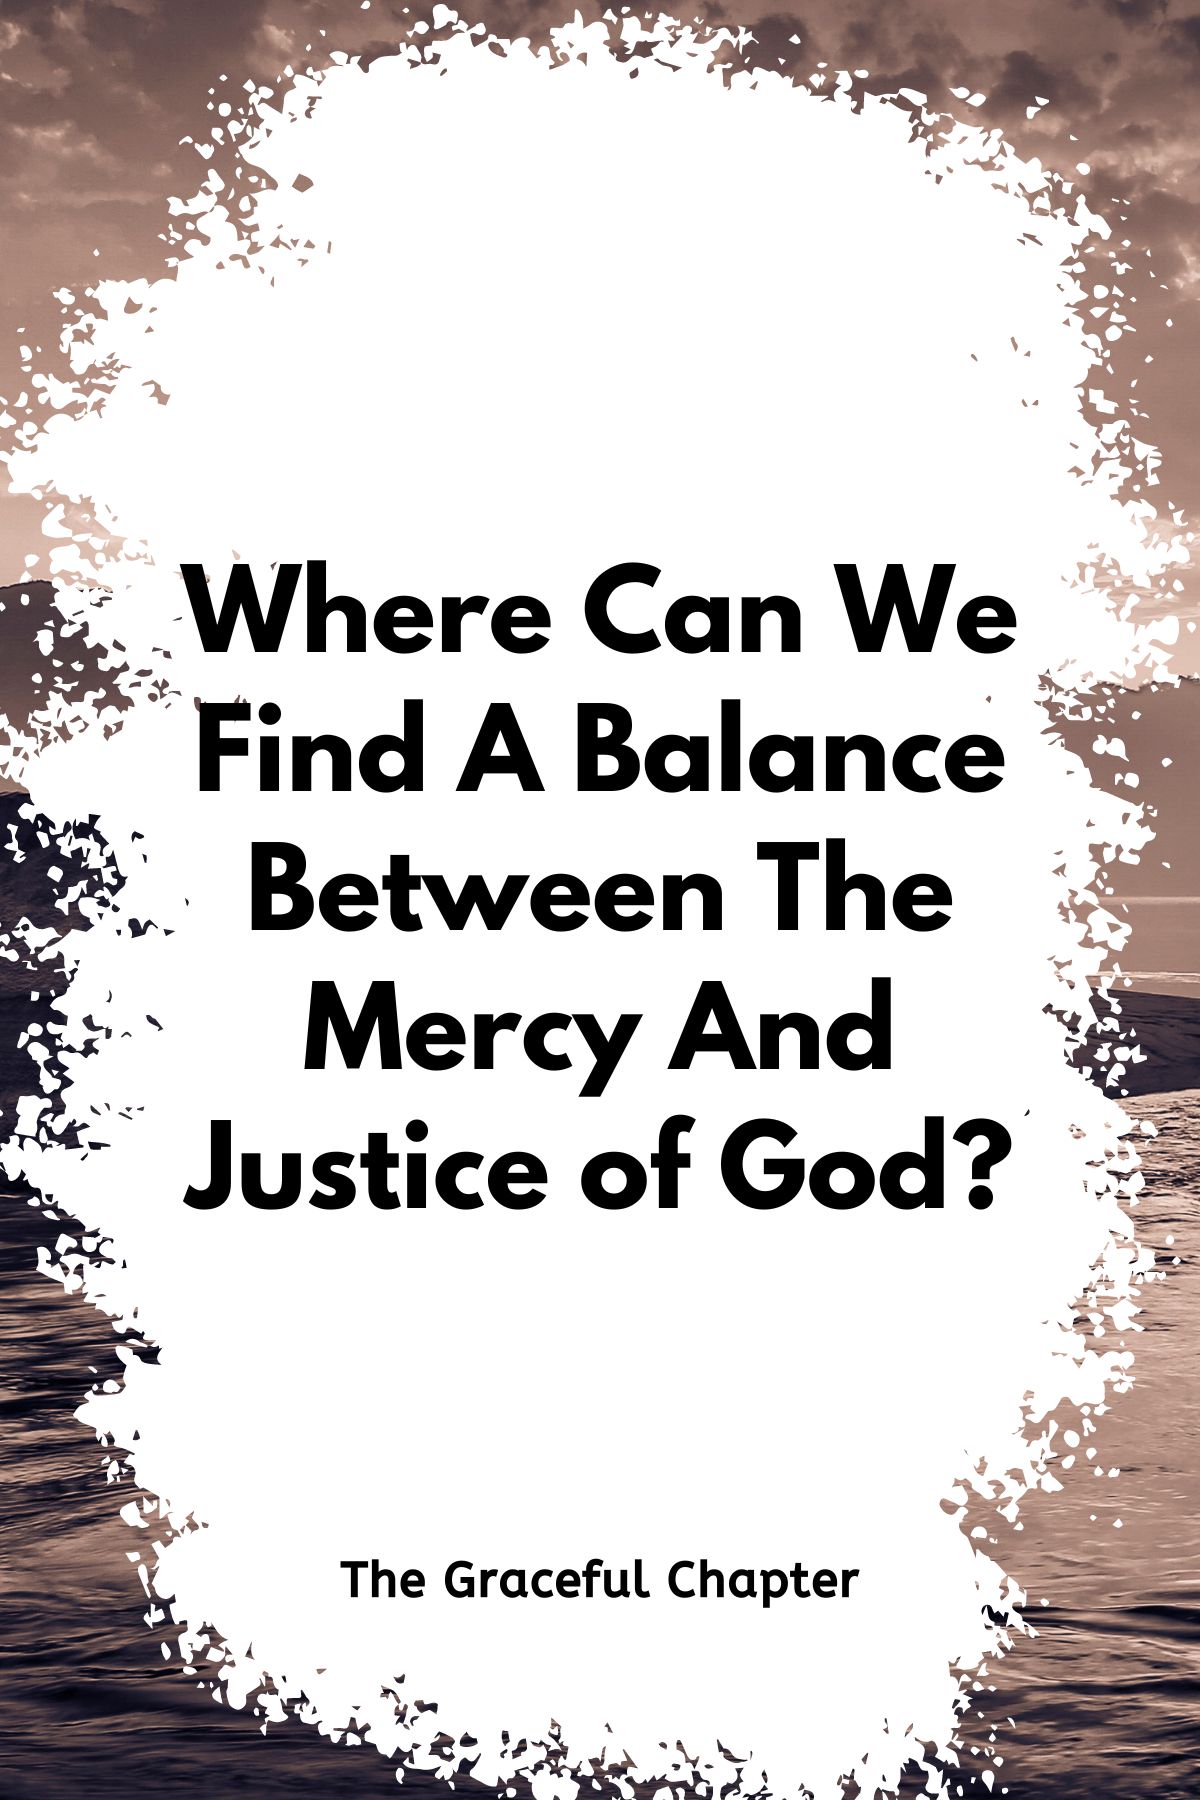 Where Can We Find A Balance Between The Mercy And Justice of God?